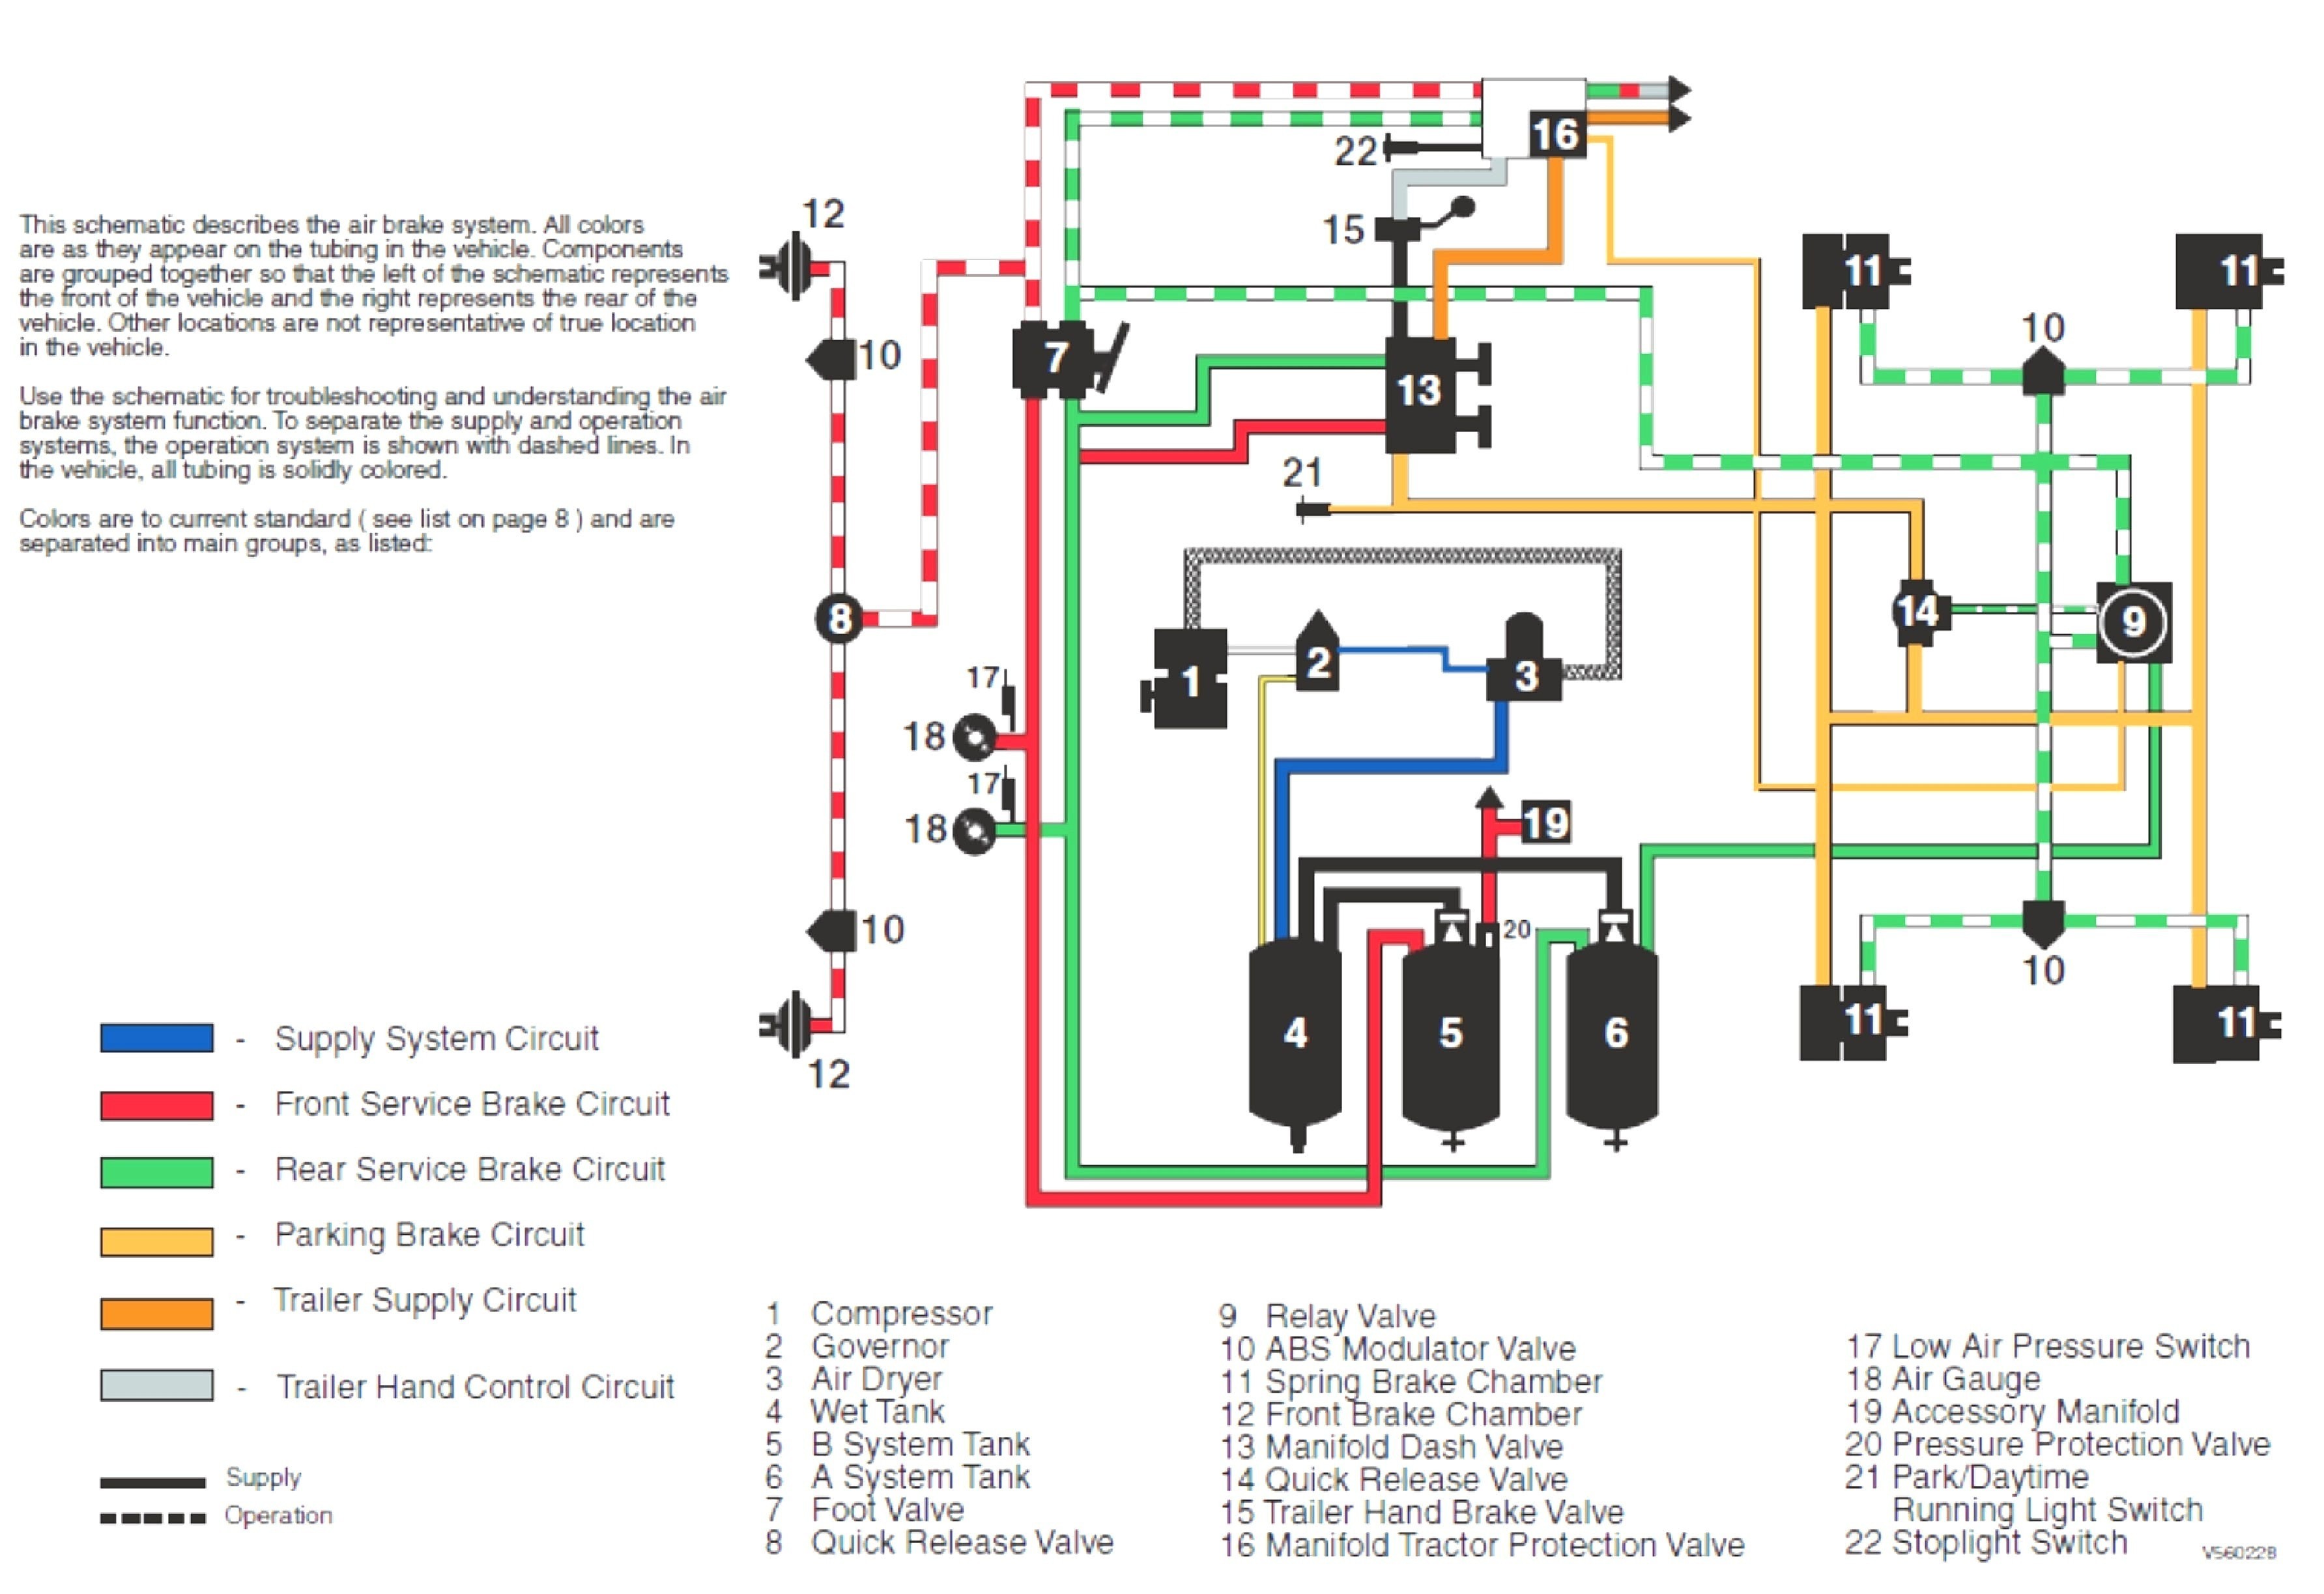 Square D Pressure Switch Wiring Diagram Wiring Diagrams for Utility Trailer Refrence Utility Trailer Wiring Of Square D Pressure Switch Wiring Diagram